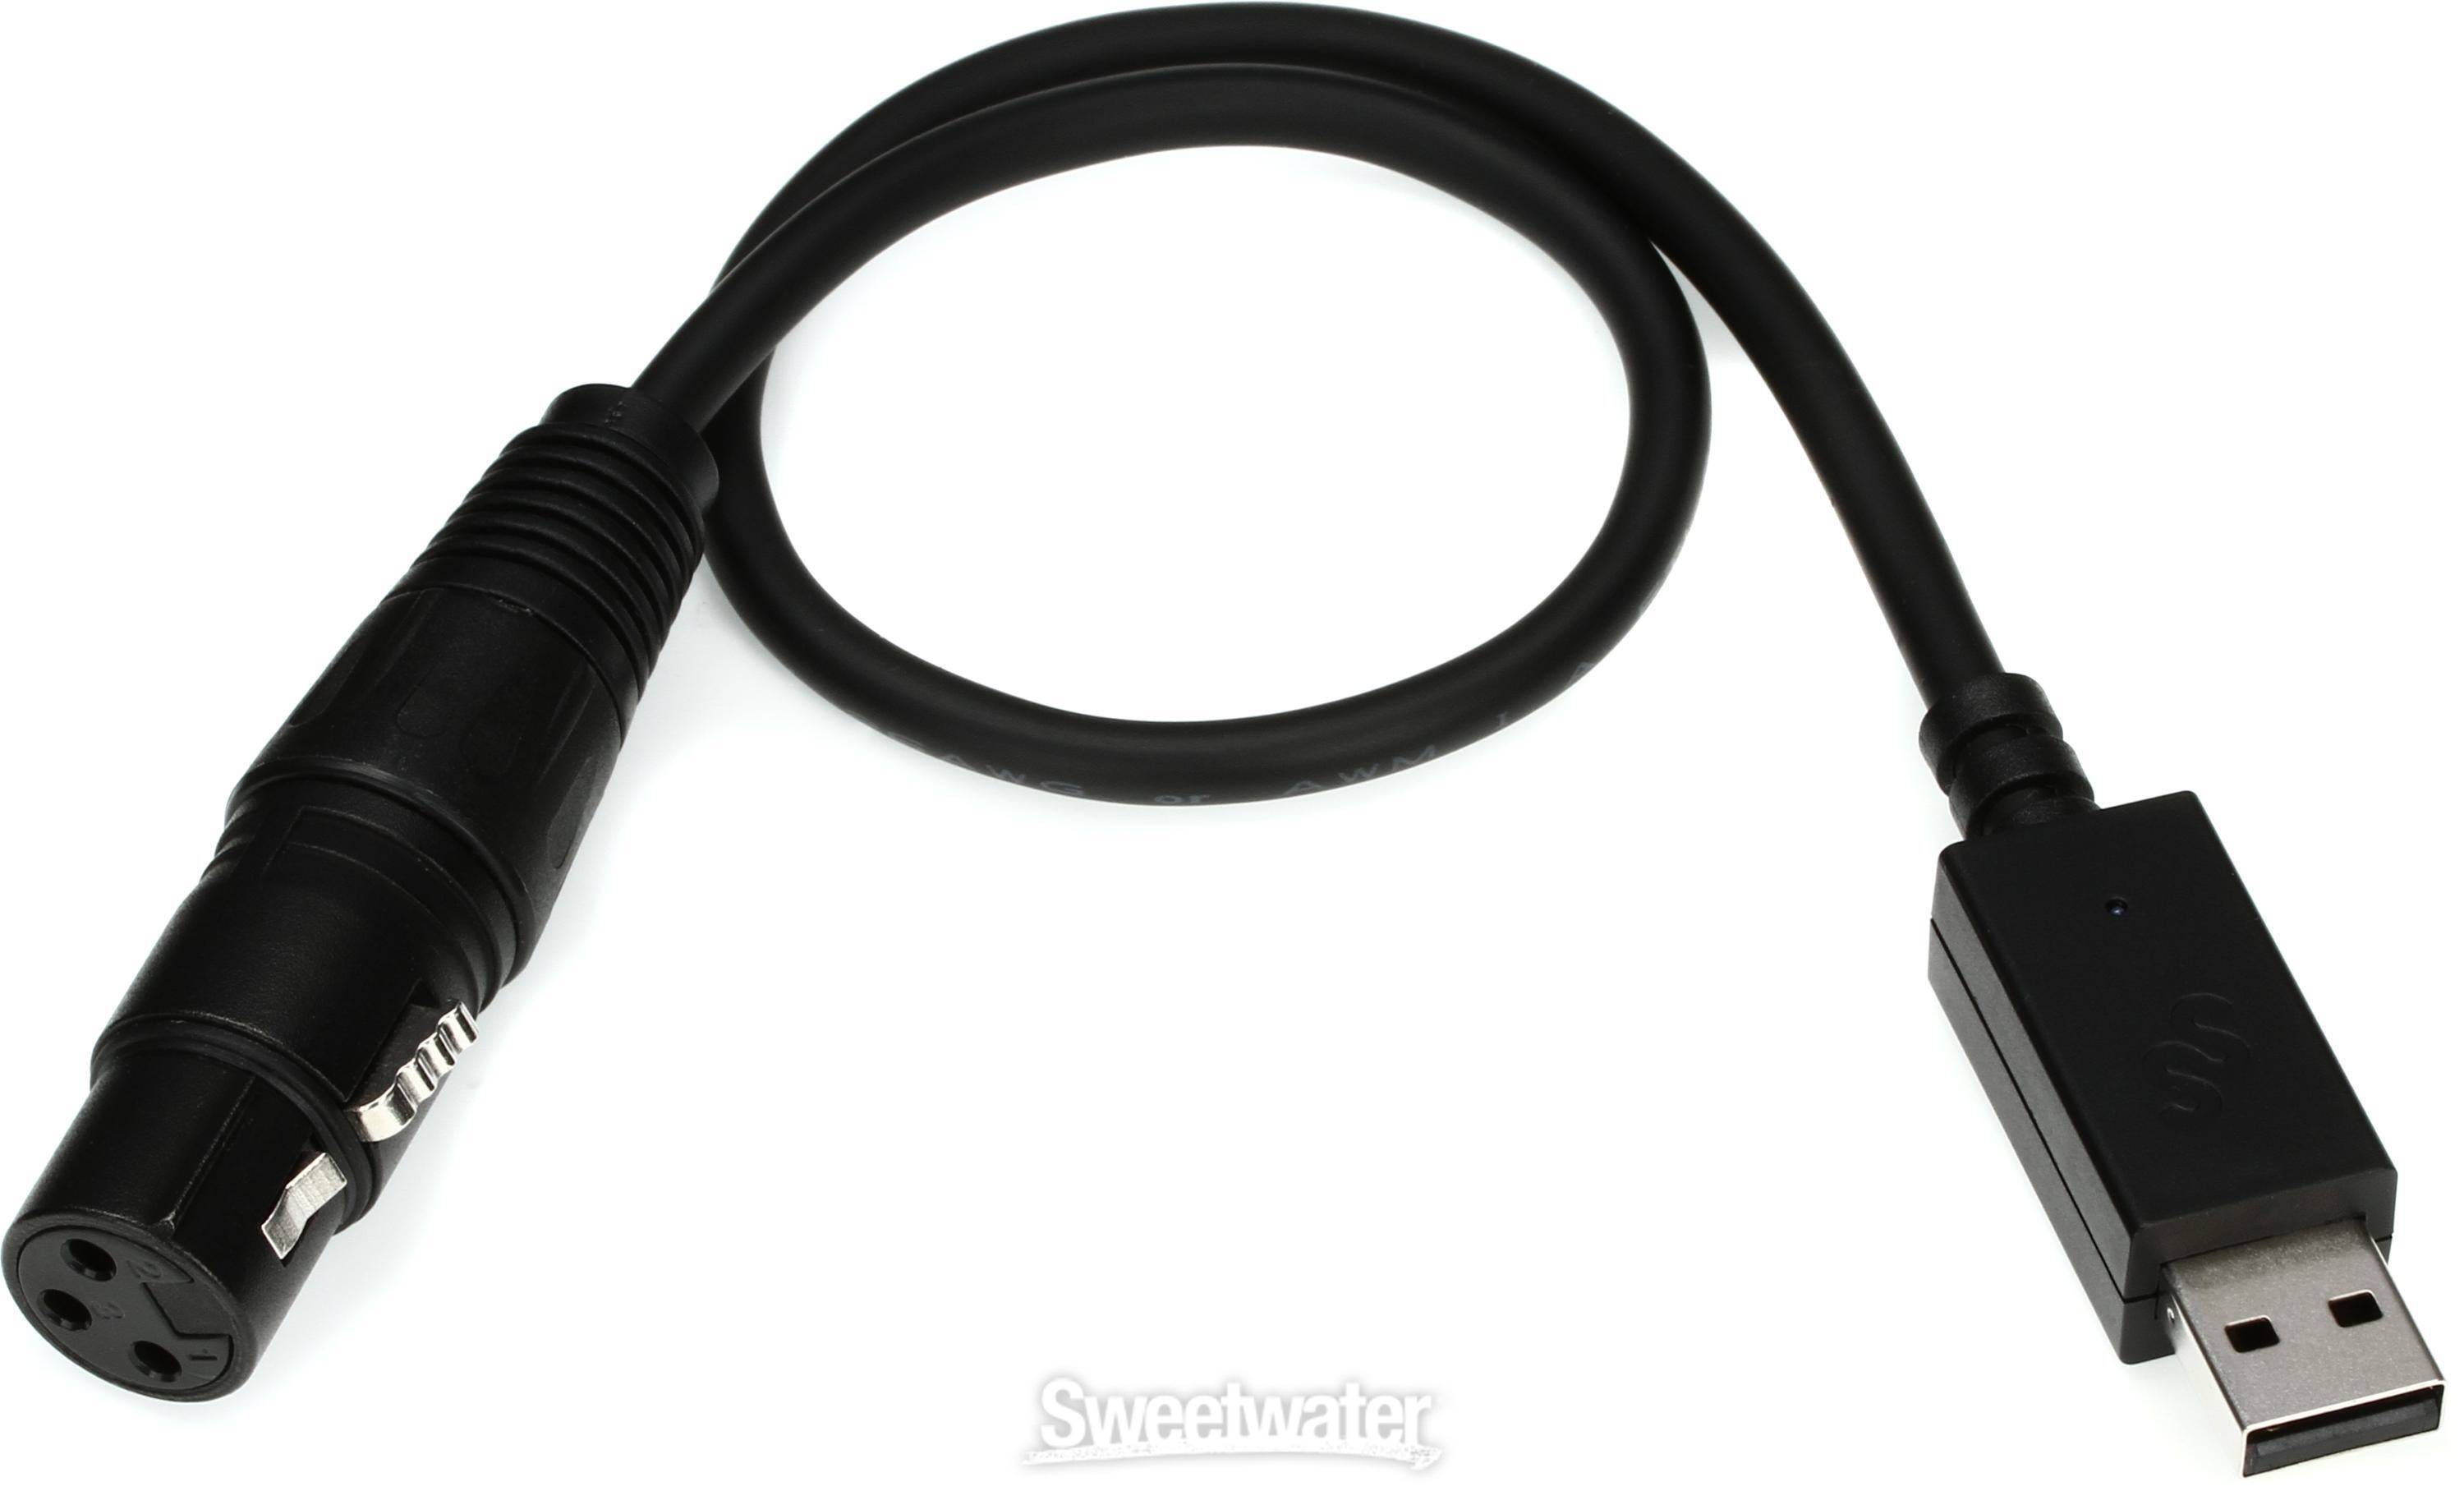 SoundSwitch Micro DMX Interface USB to DMX Interface | Sweetwater